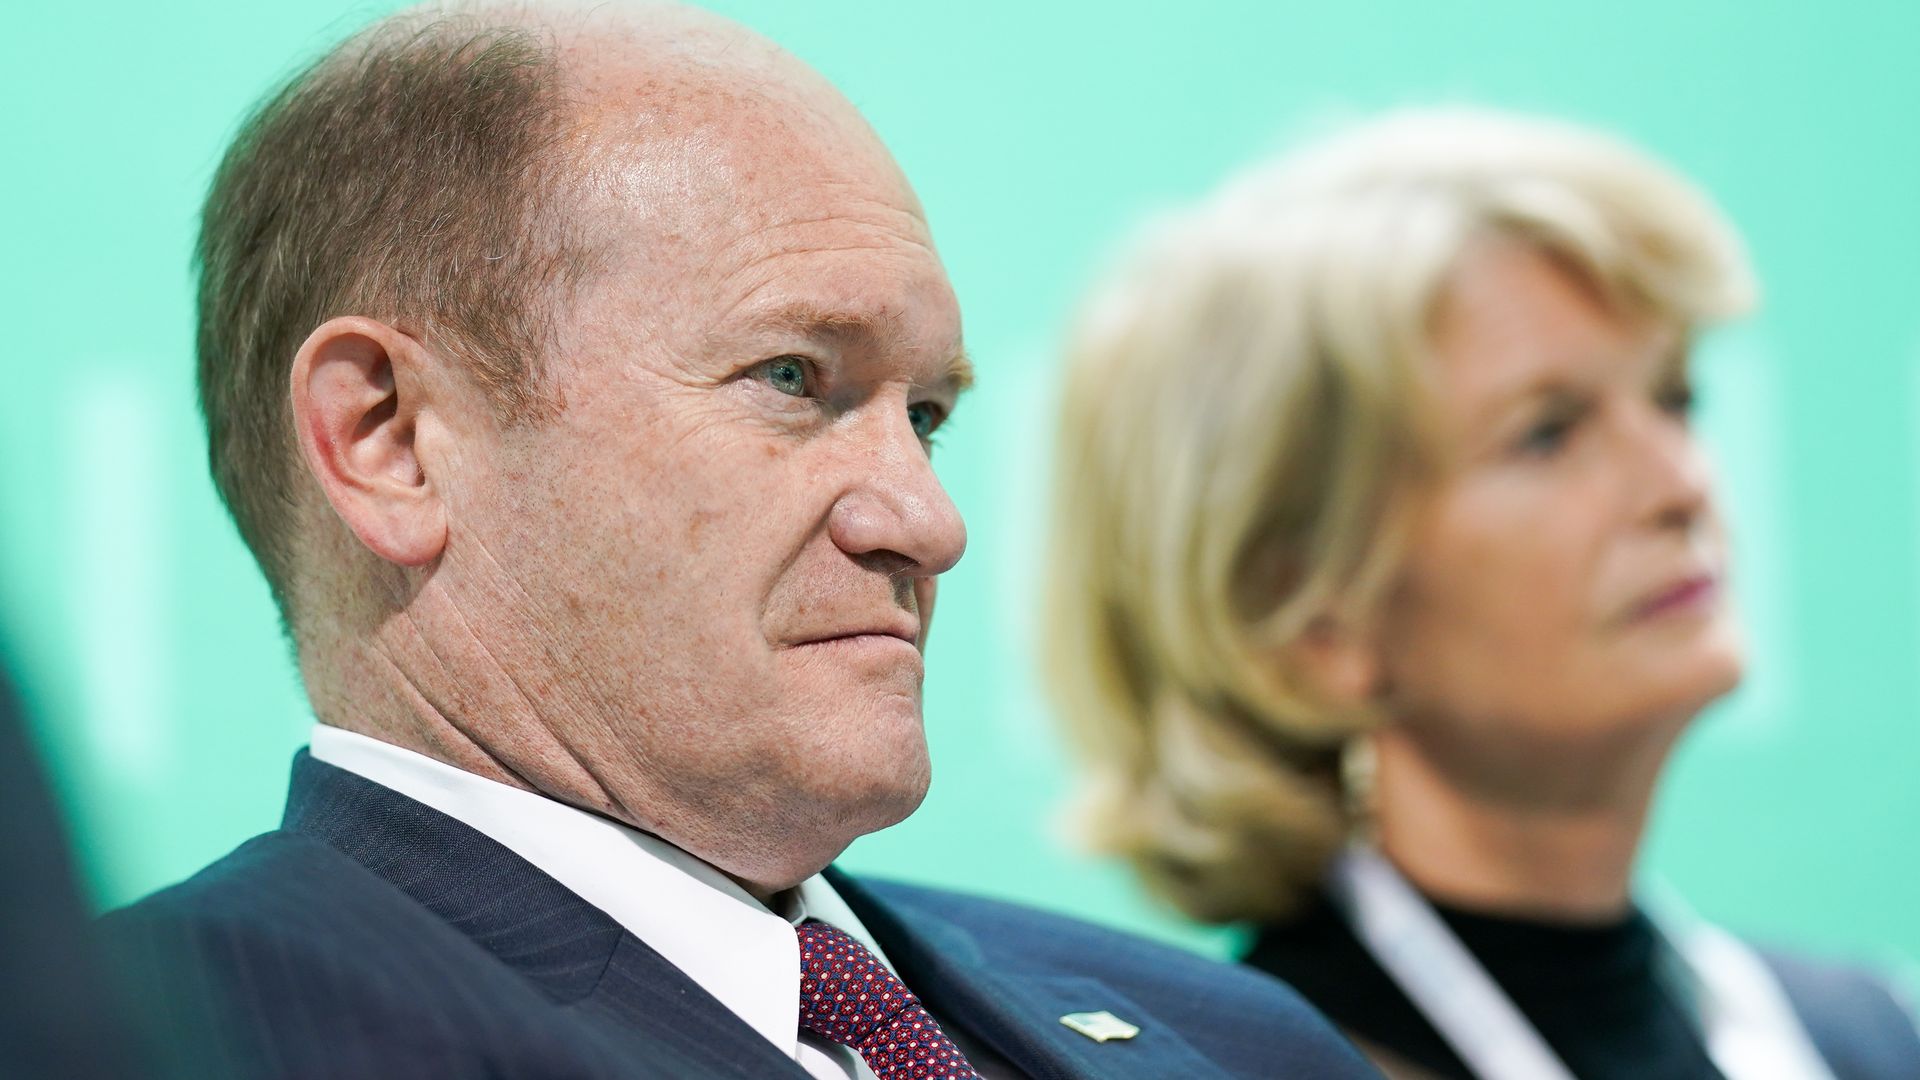 Senator Chris Coons listens during an Atlantic Council event on day seven of the COP26 at SECC on November 06, 2021 in Glasgow, Scotland.